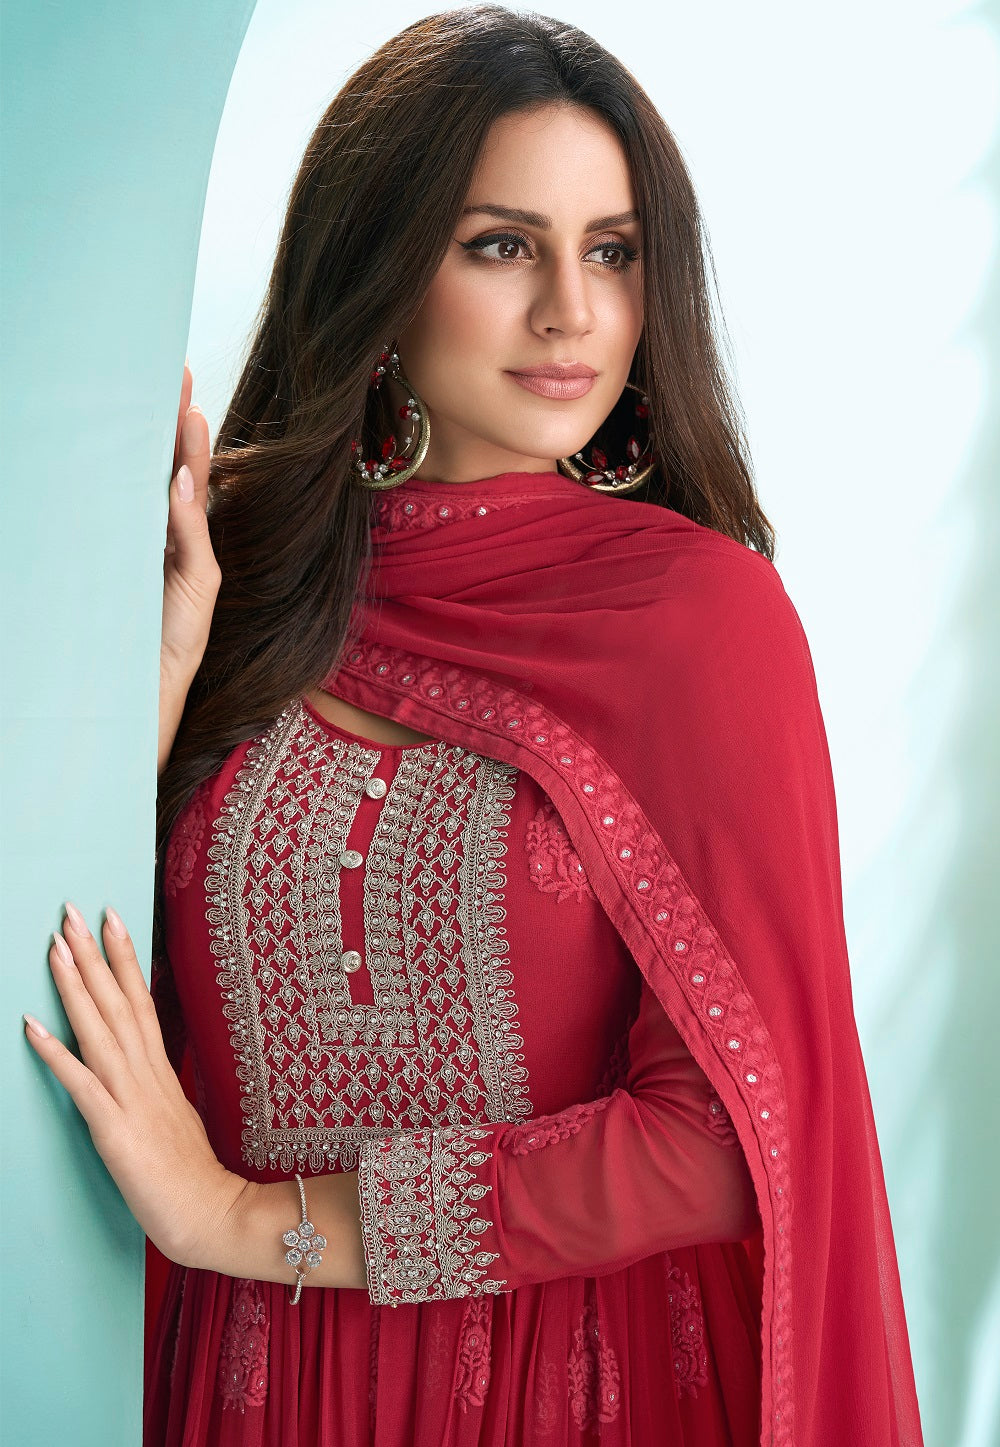 Georgette Abaya Style Suit in Red